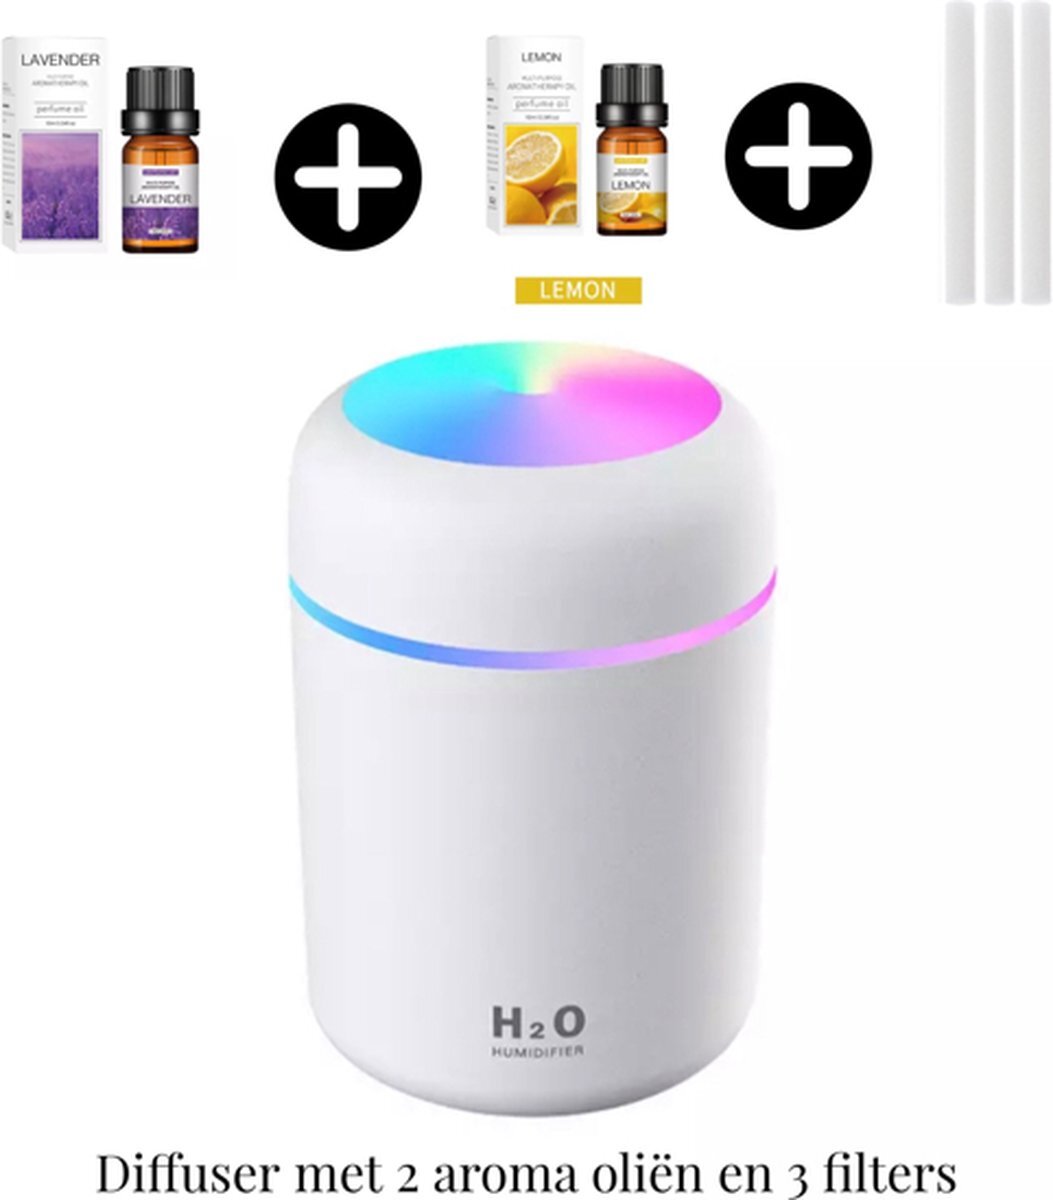 casamix Aroma Diffuser Wit-Luchtbevochtiger 300 ml - Incl. 2 aroma olien en 3 filters -LED sfeerverlichting- compact- Auto en huis gebruik